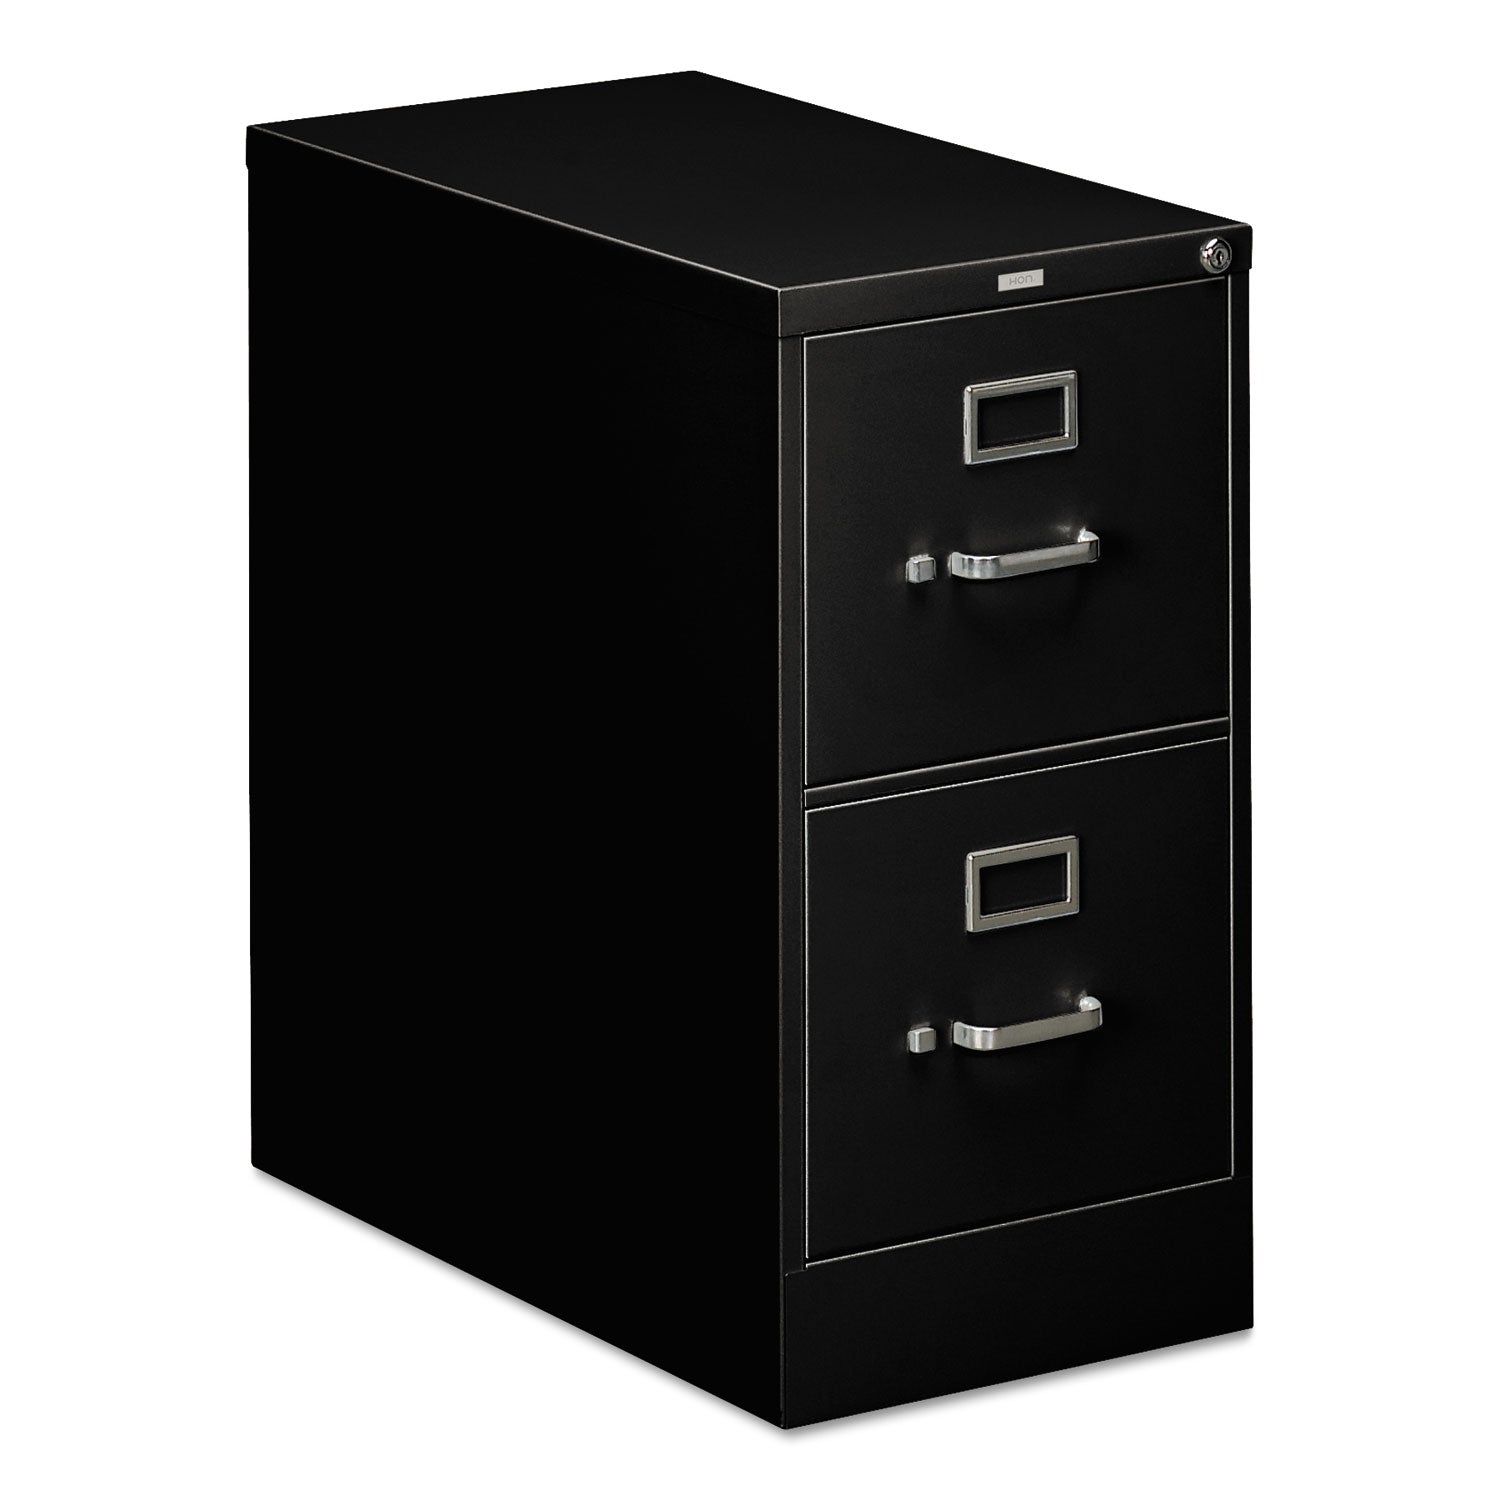 310 Series Vertical File, 2 Letter-Size File Drawers, Black, 15" x 26.5" x 29 - 